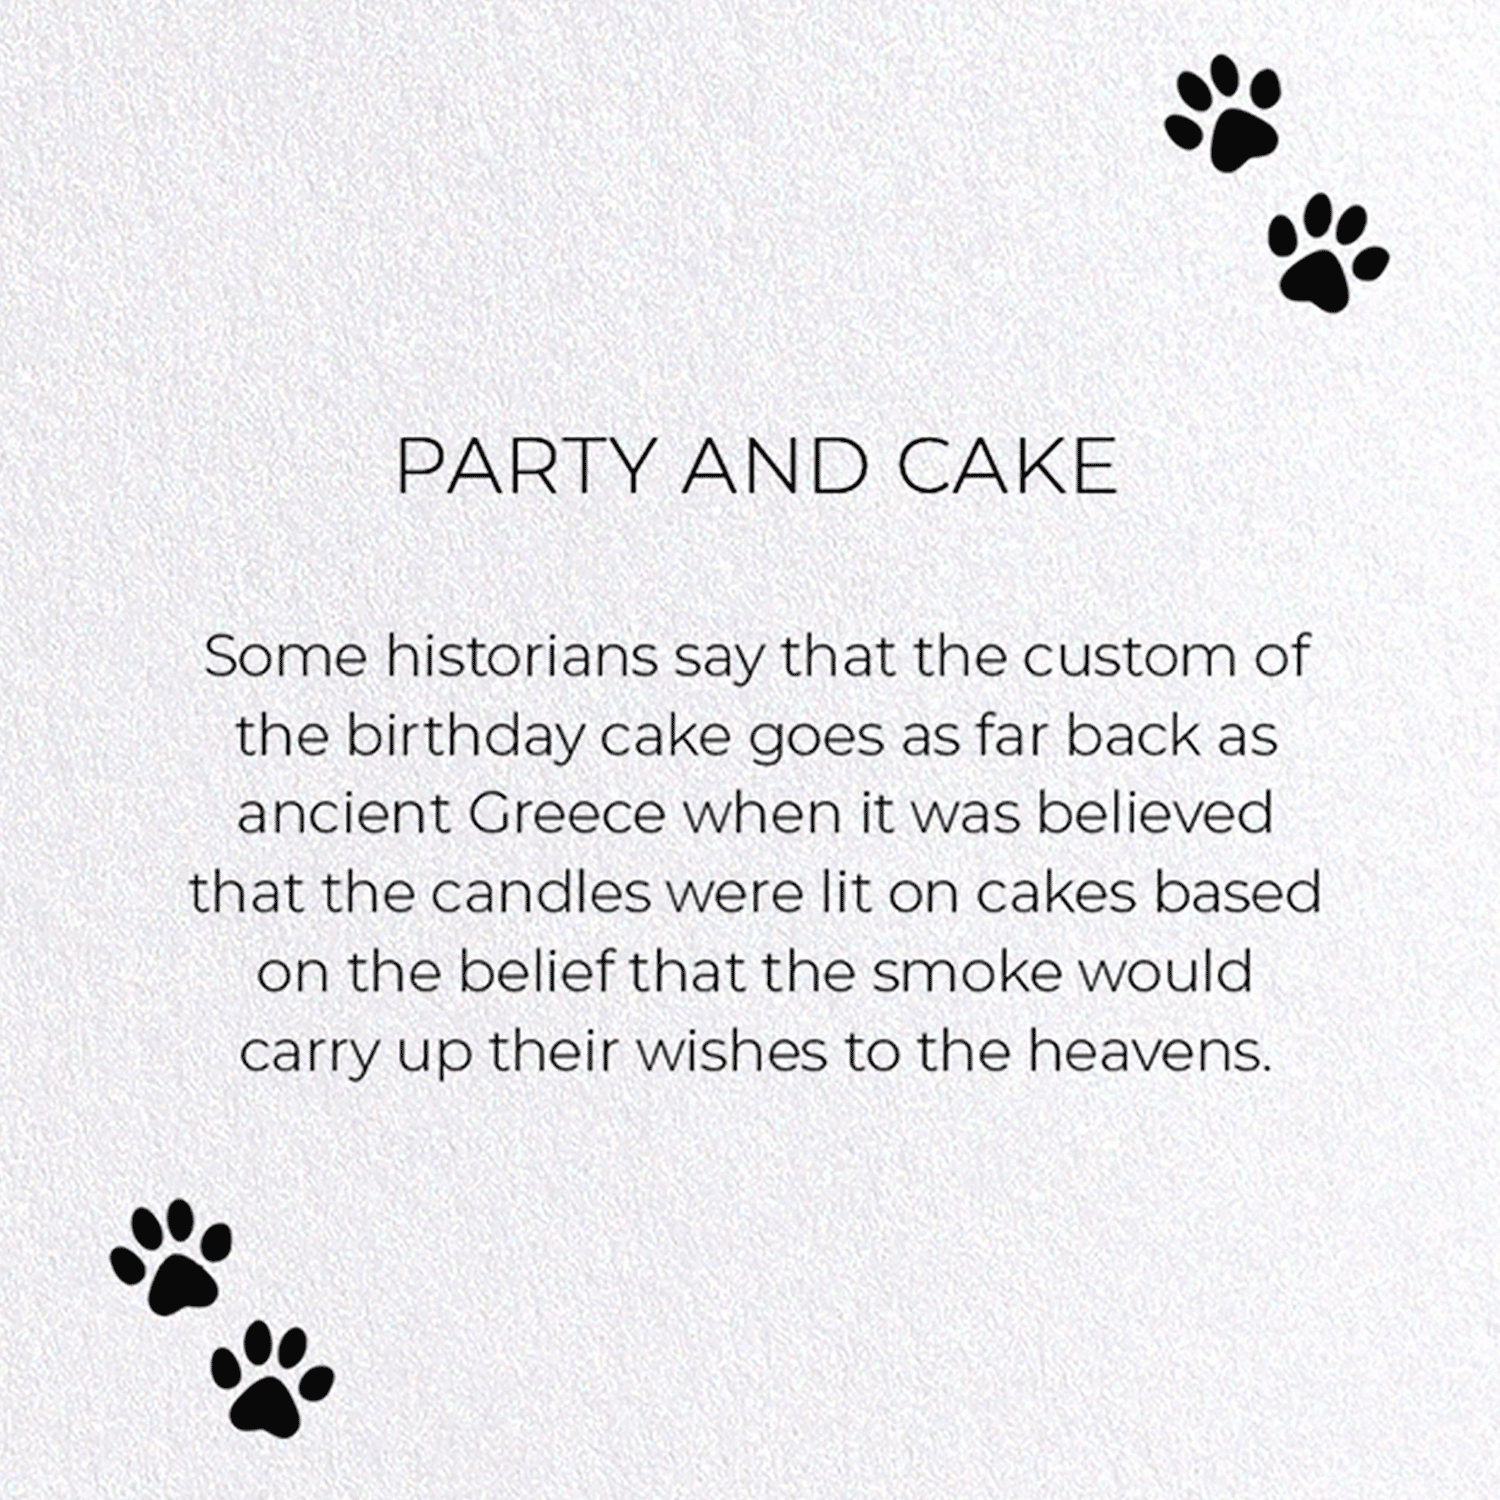 PARTY AND CAKE